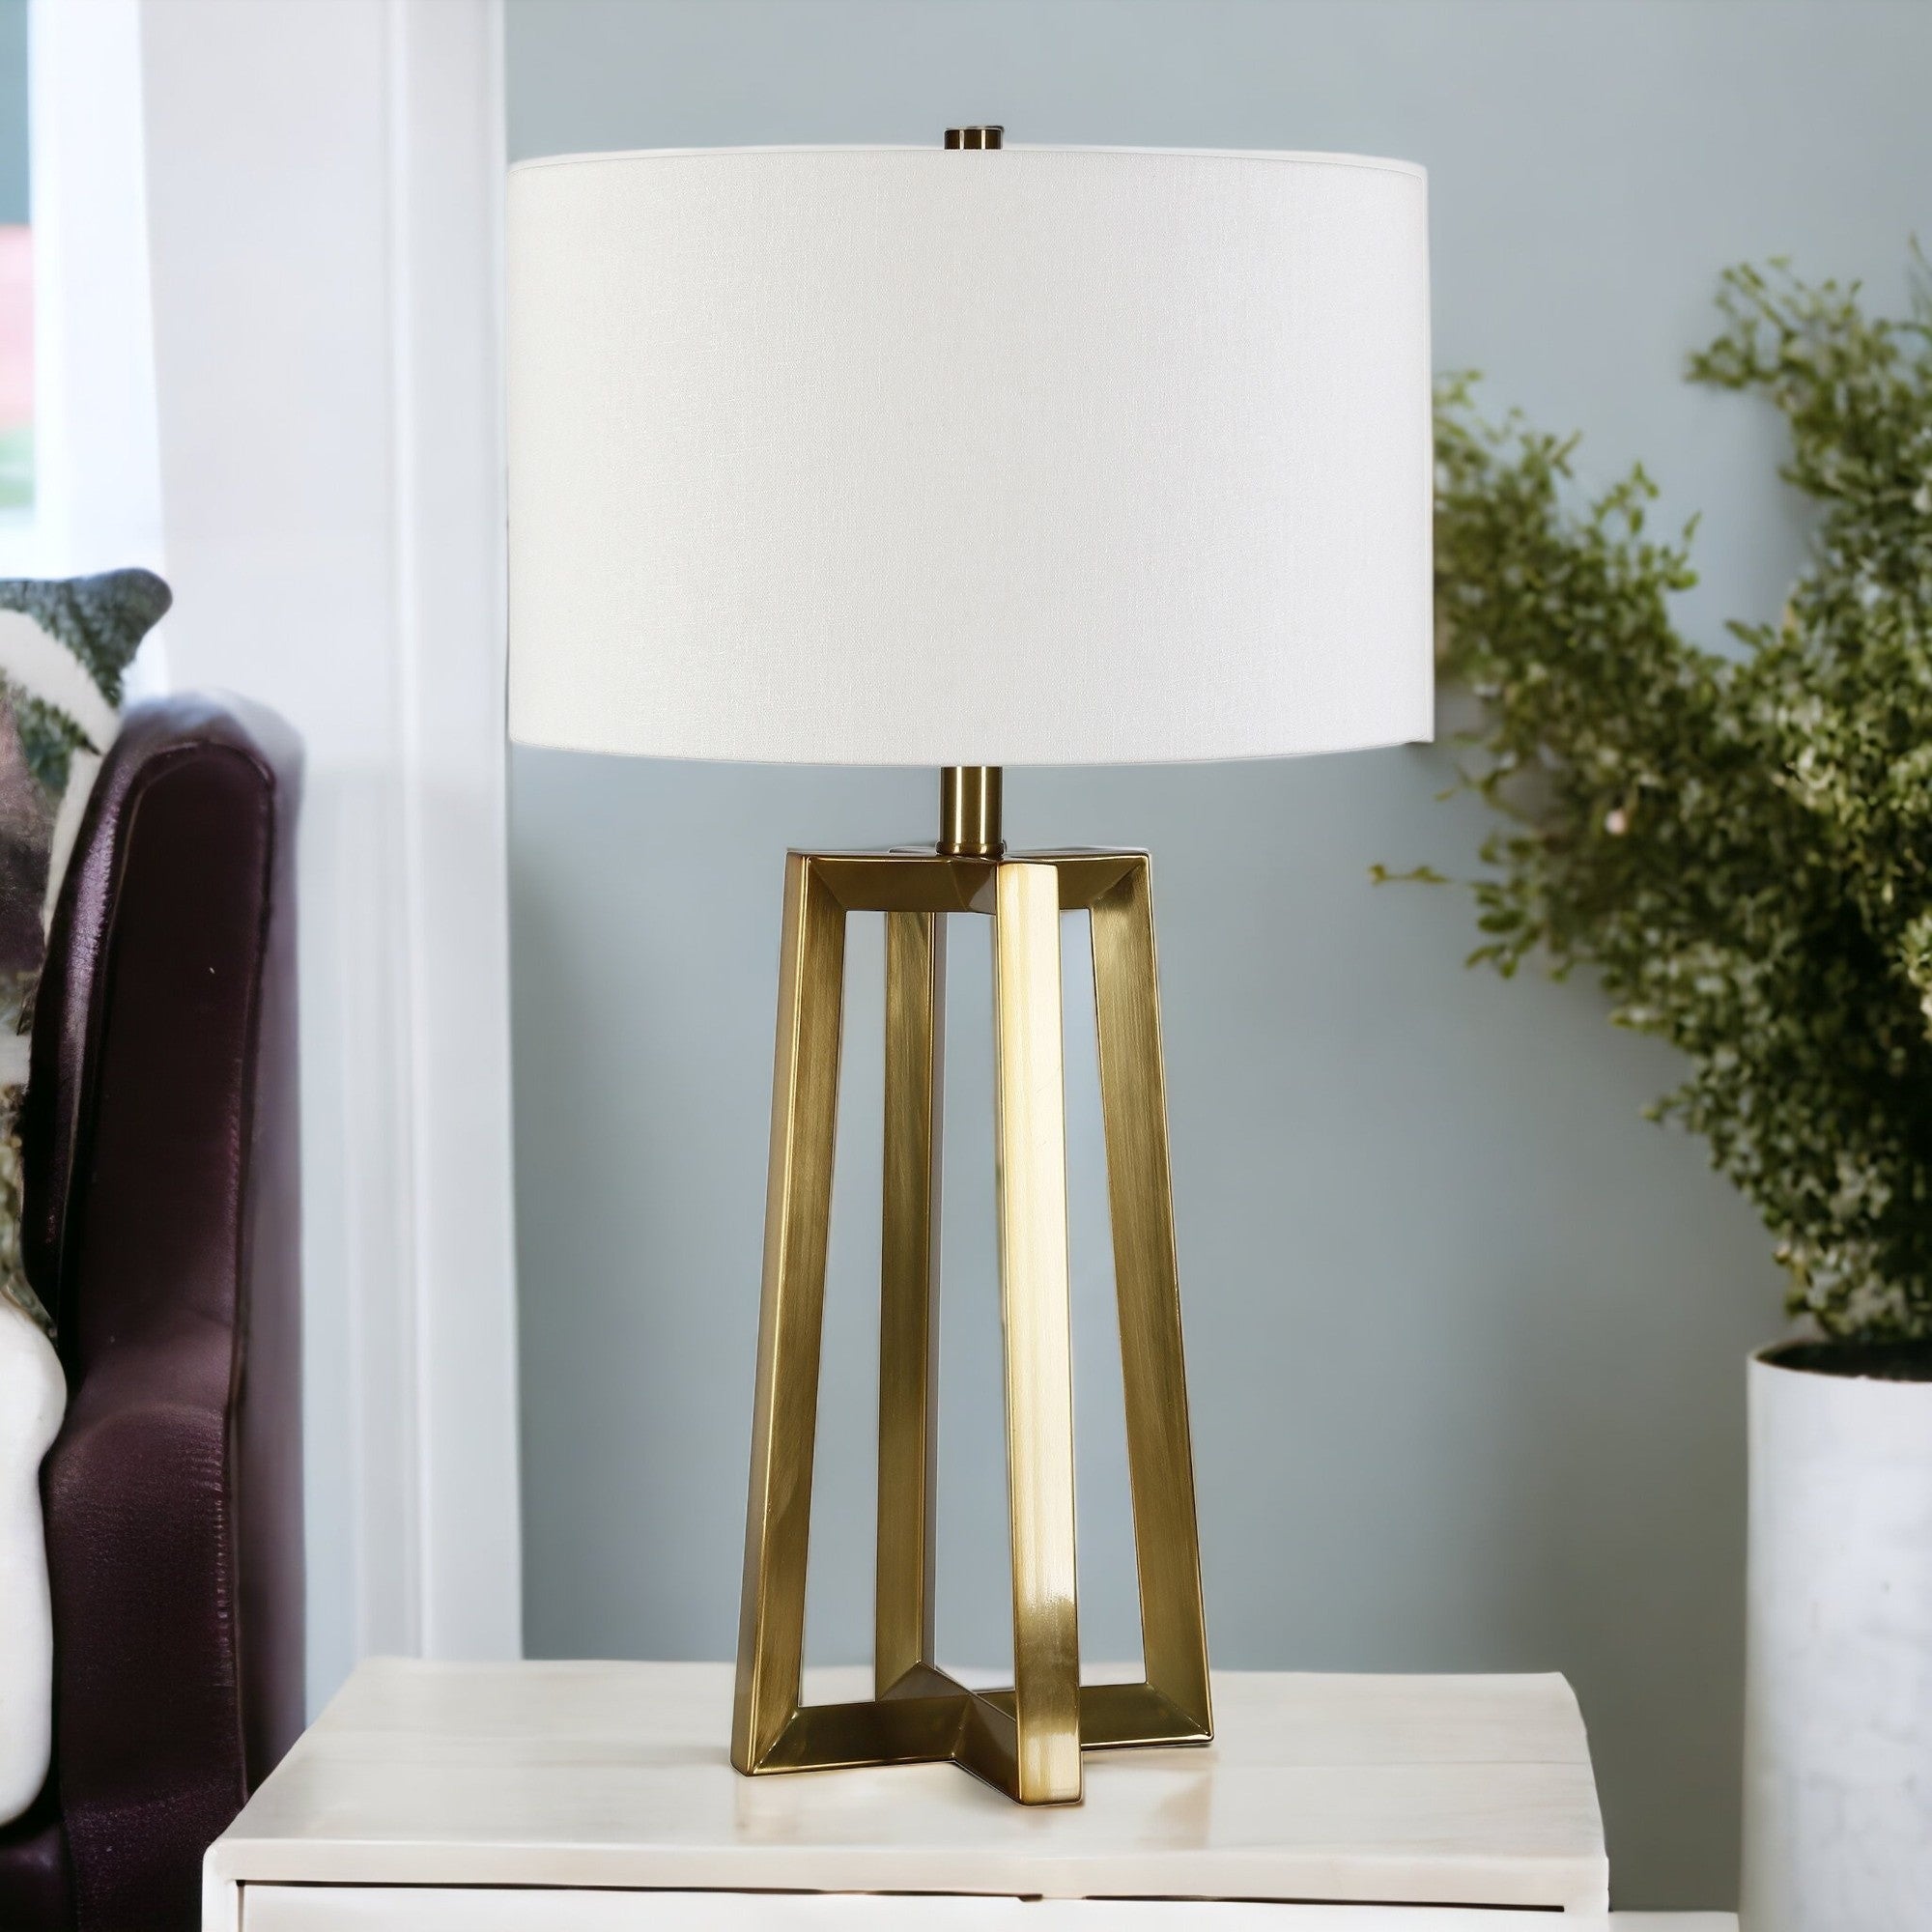 24" Brass Metal Table Lamp With White Drum Shade